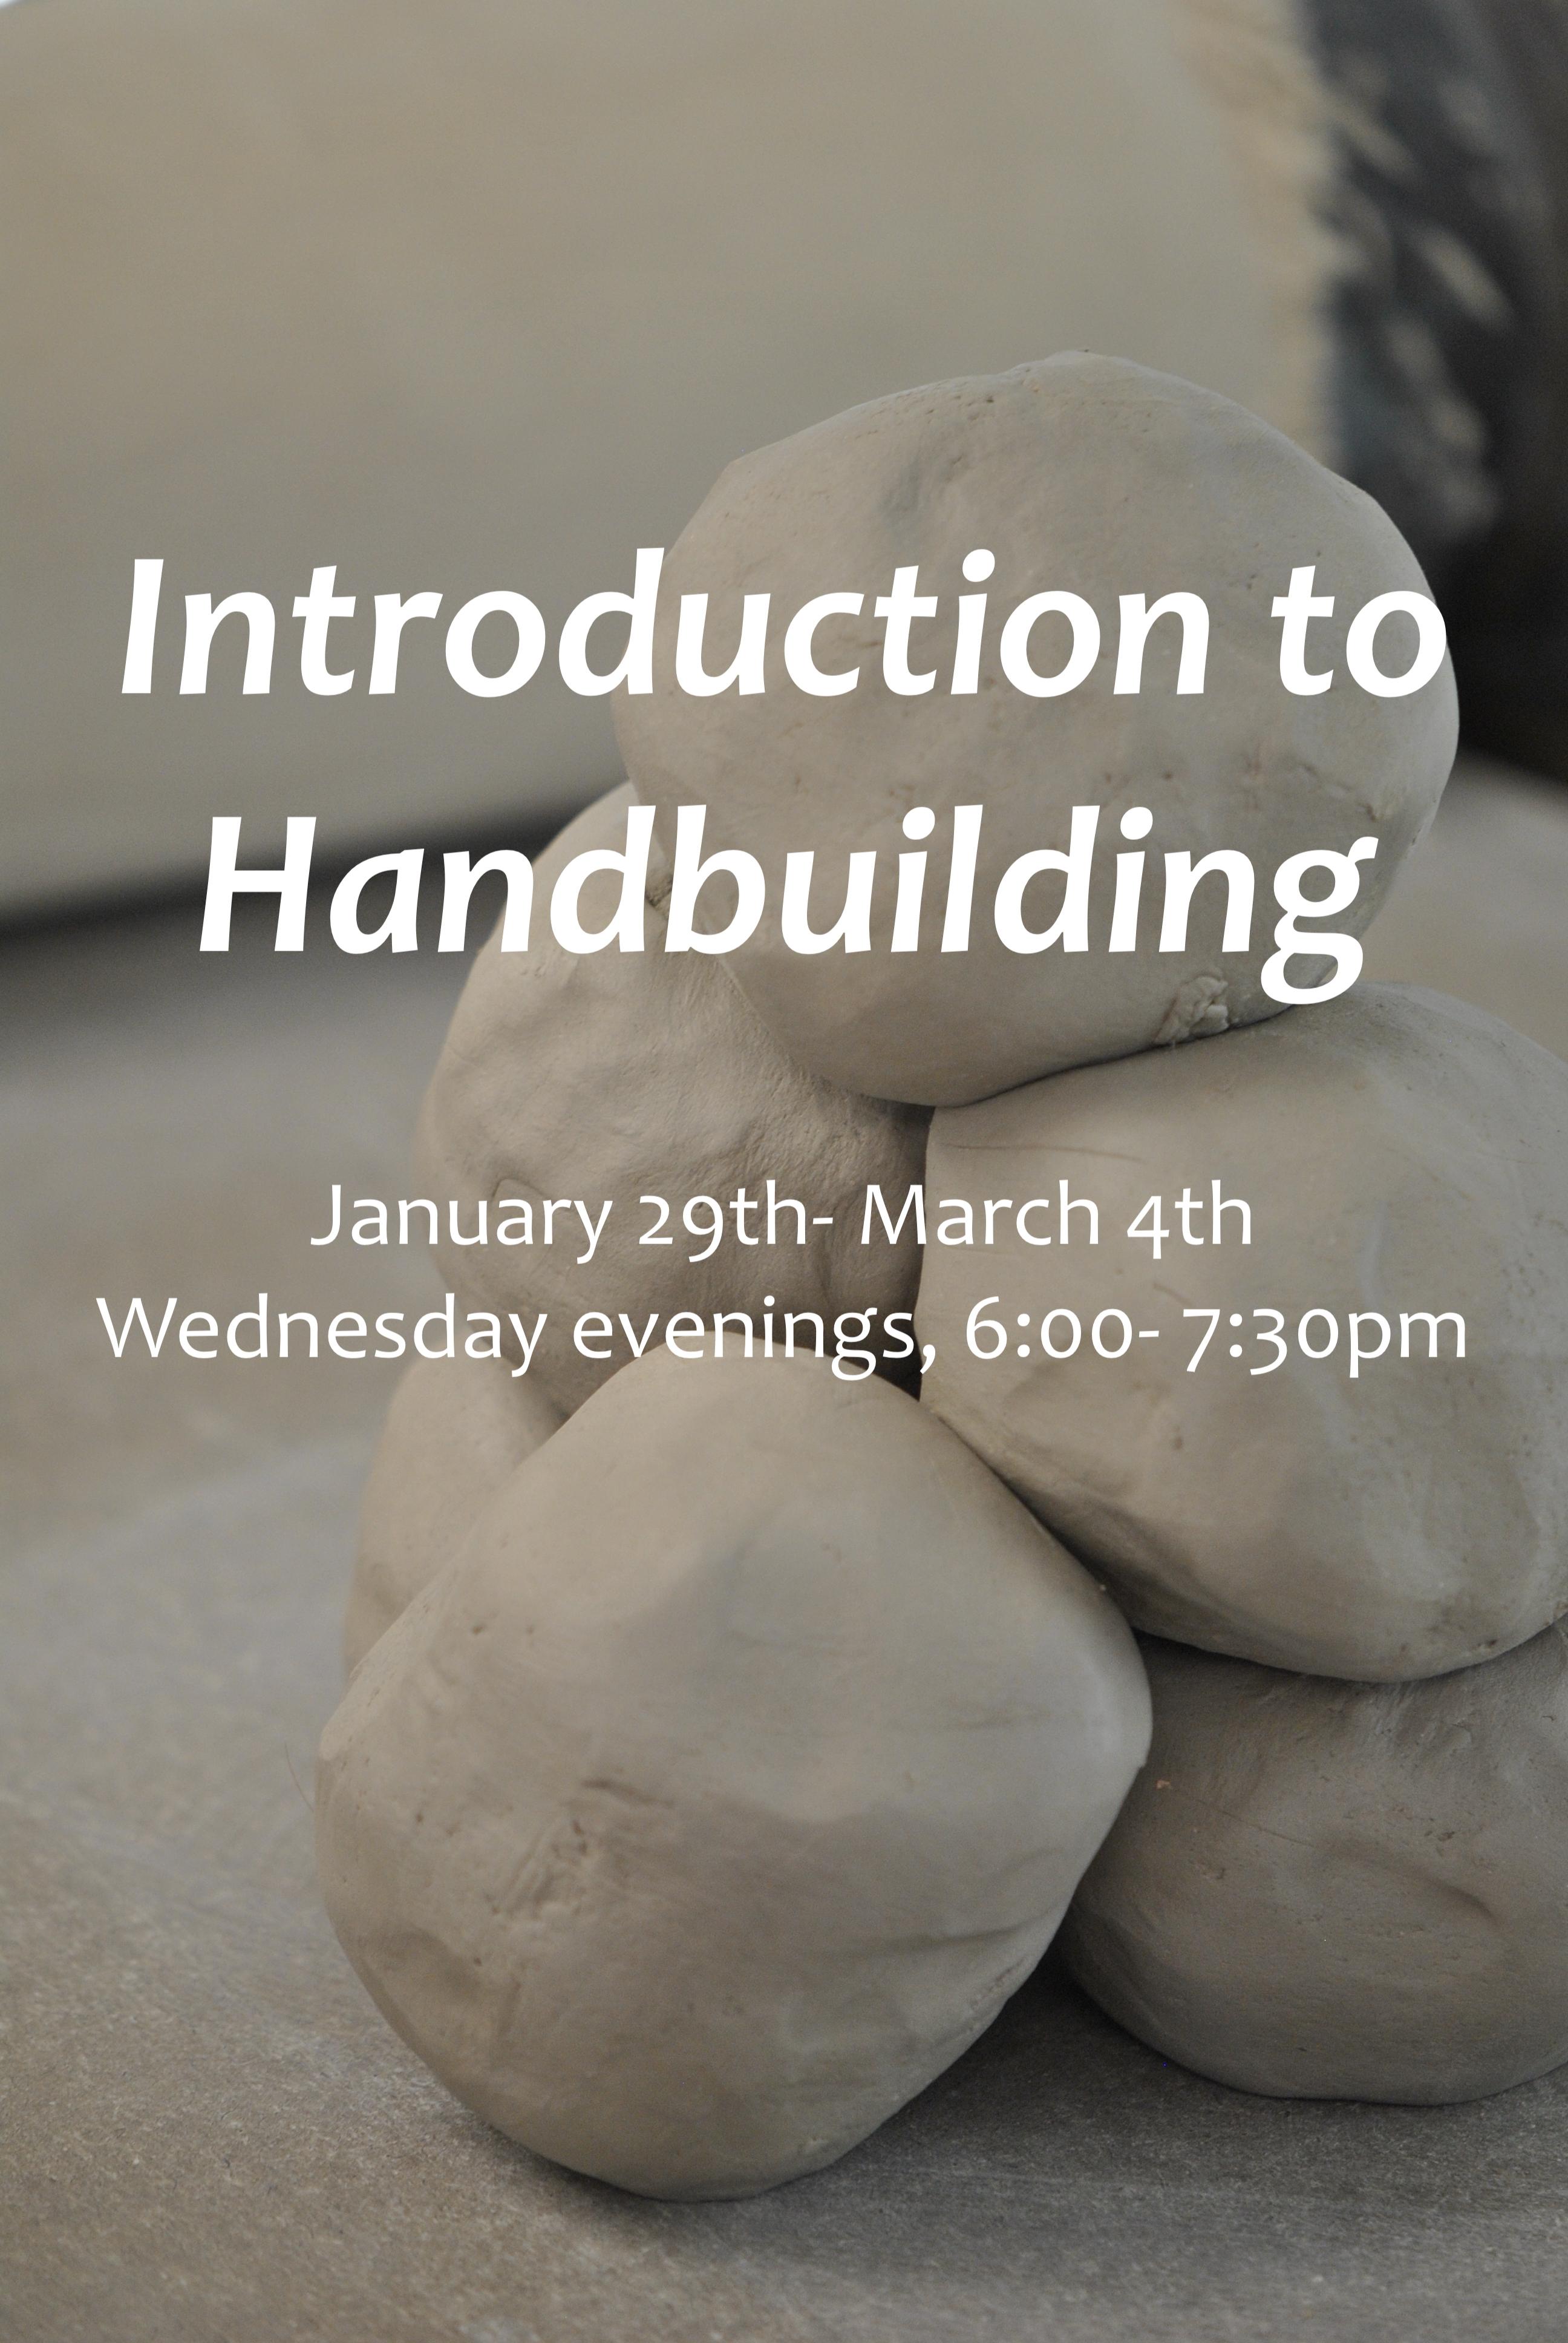 Introduction to Handbuilding (January 29- March 4)